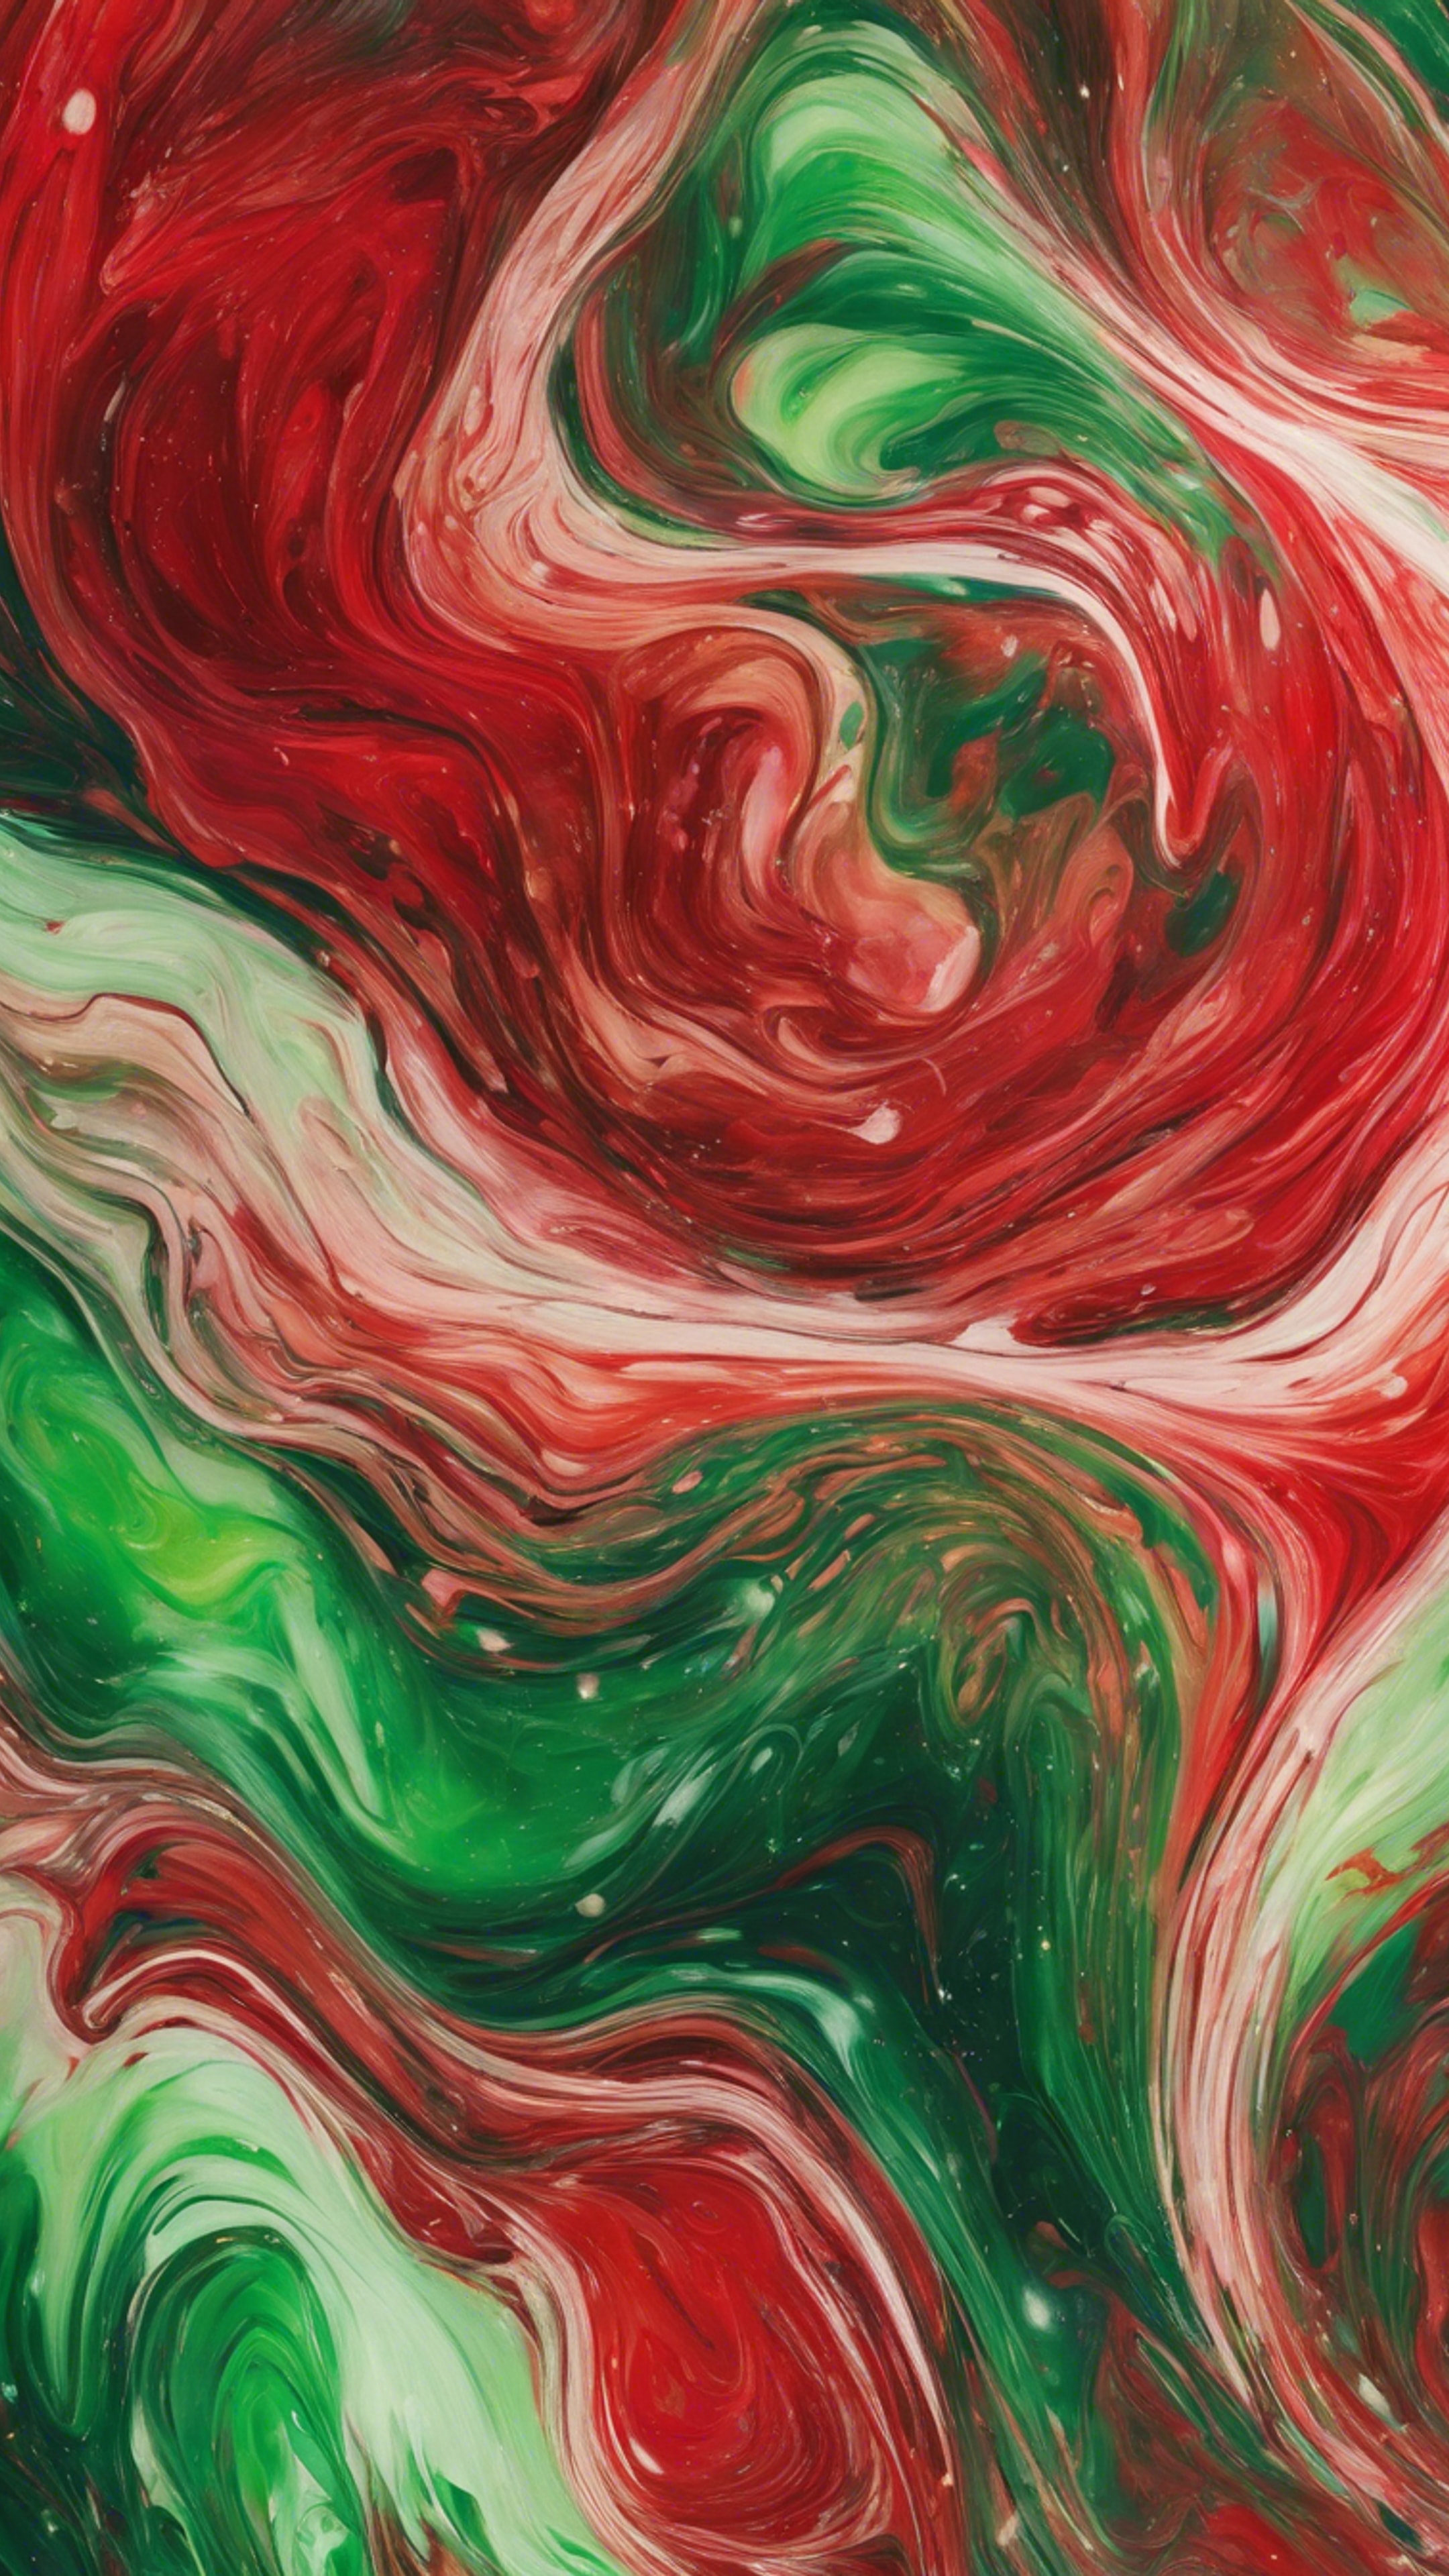 A vivid painting of swirling red and green abstract patterns Tapeta[5978fc4bccef4bcc8a58]